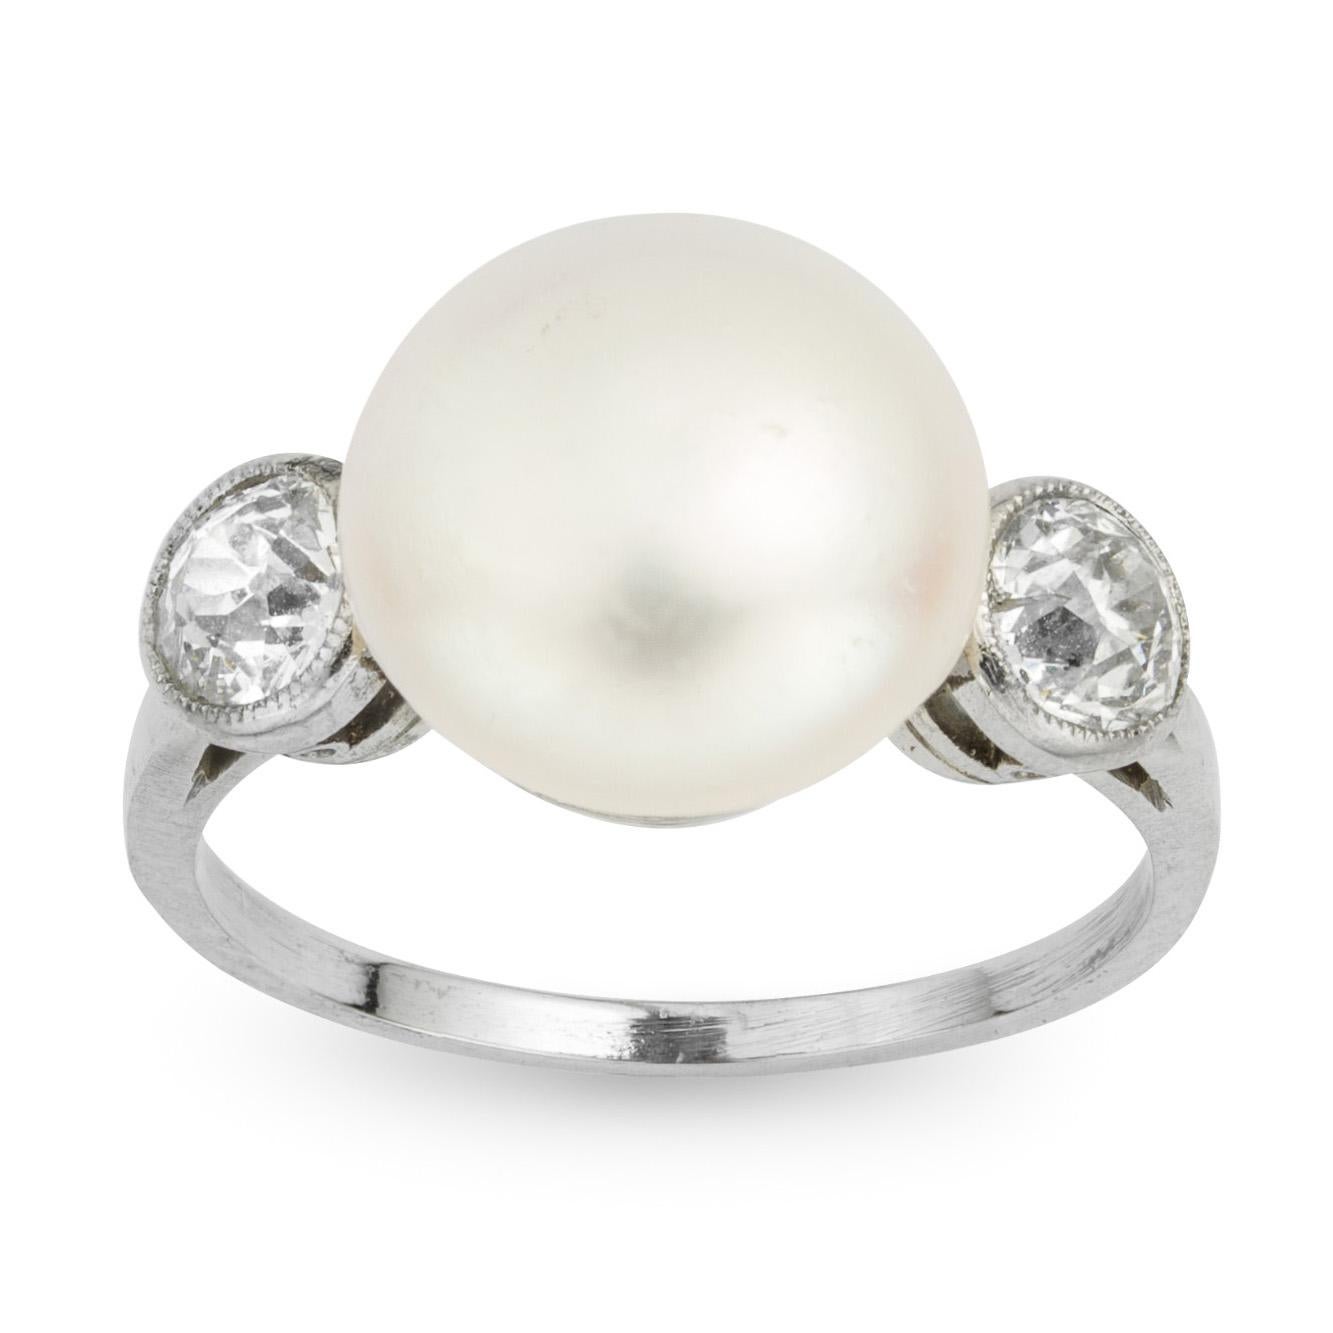 A natural pearl and diamond three stone ring, the bouton pearl measuring approximately 10.3mm in diameter, flanked by two old brilliant-cut diamonds, estimated to weigh a total of 0.5 carats, millegrain set to a platinum mount with chenier gallery